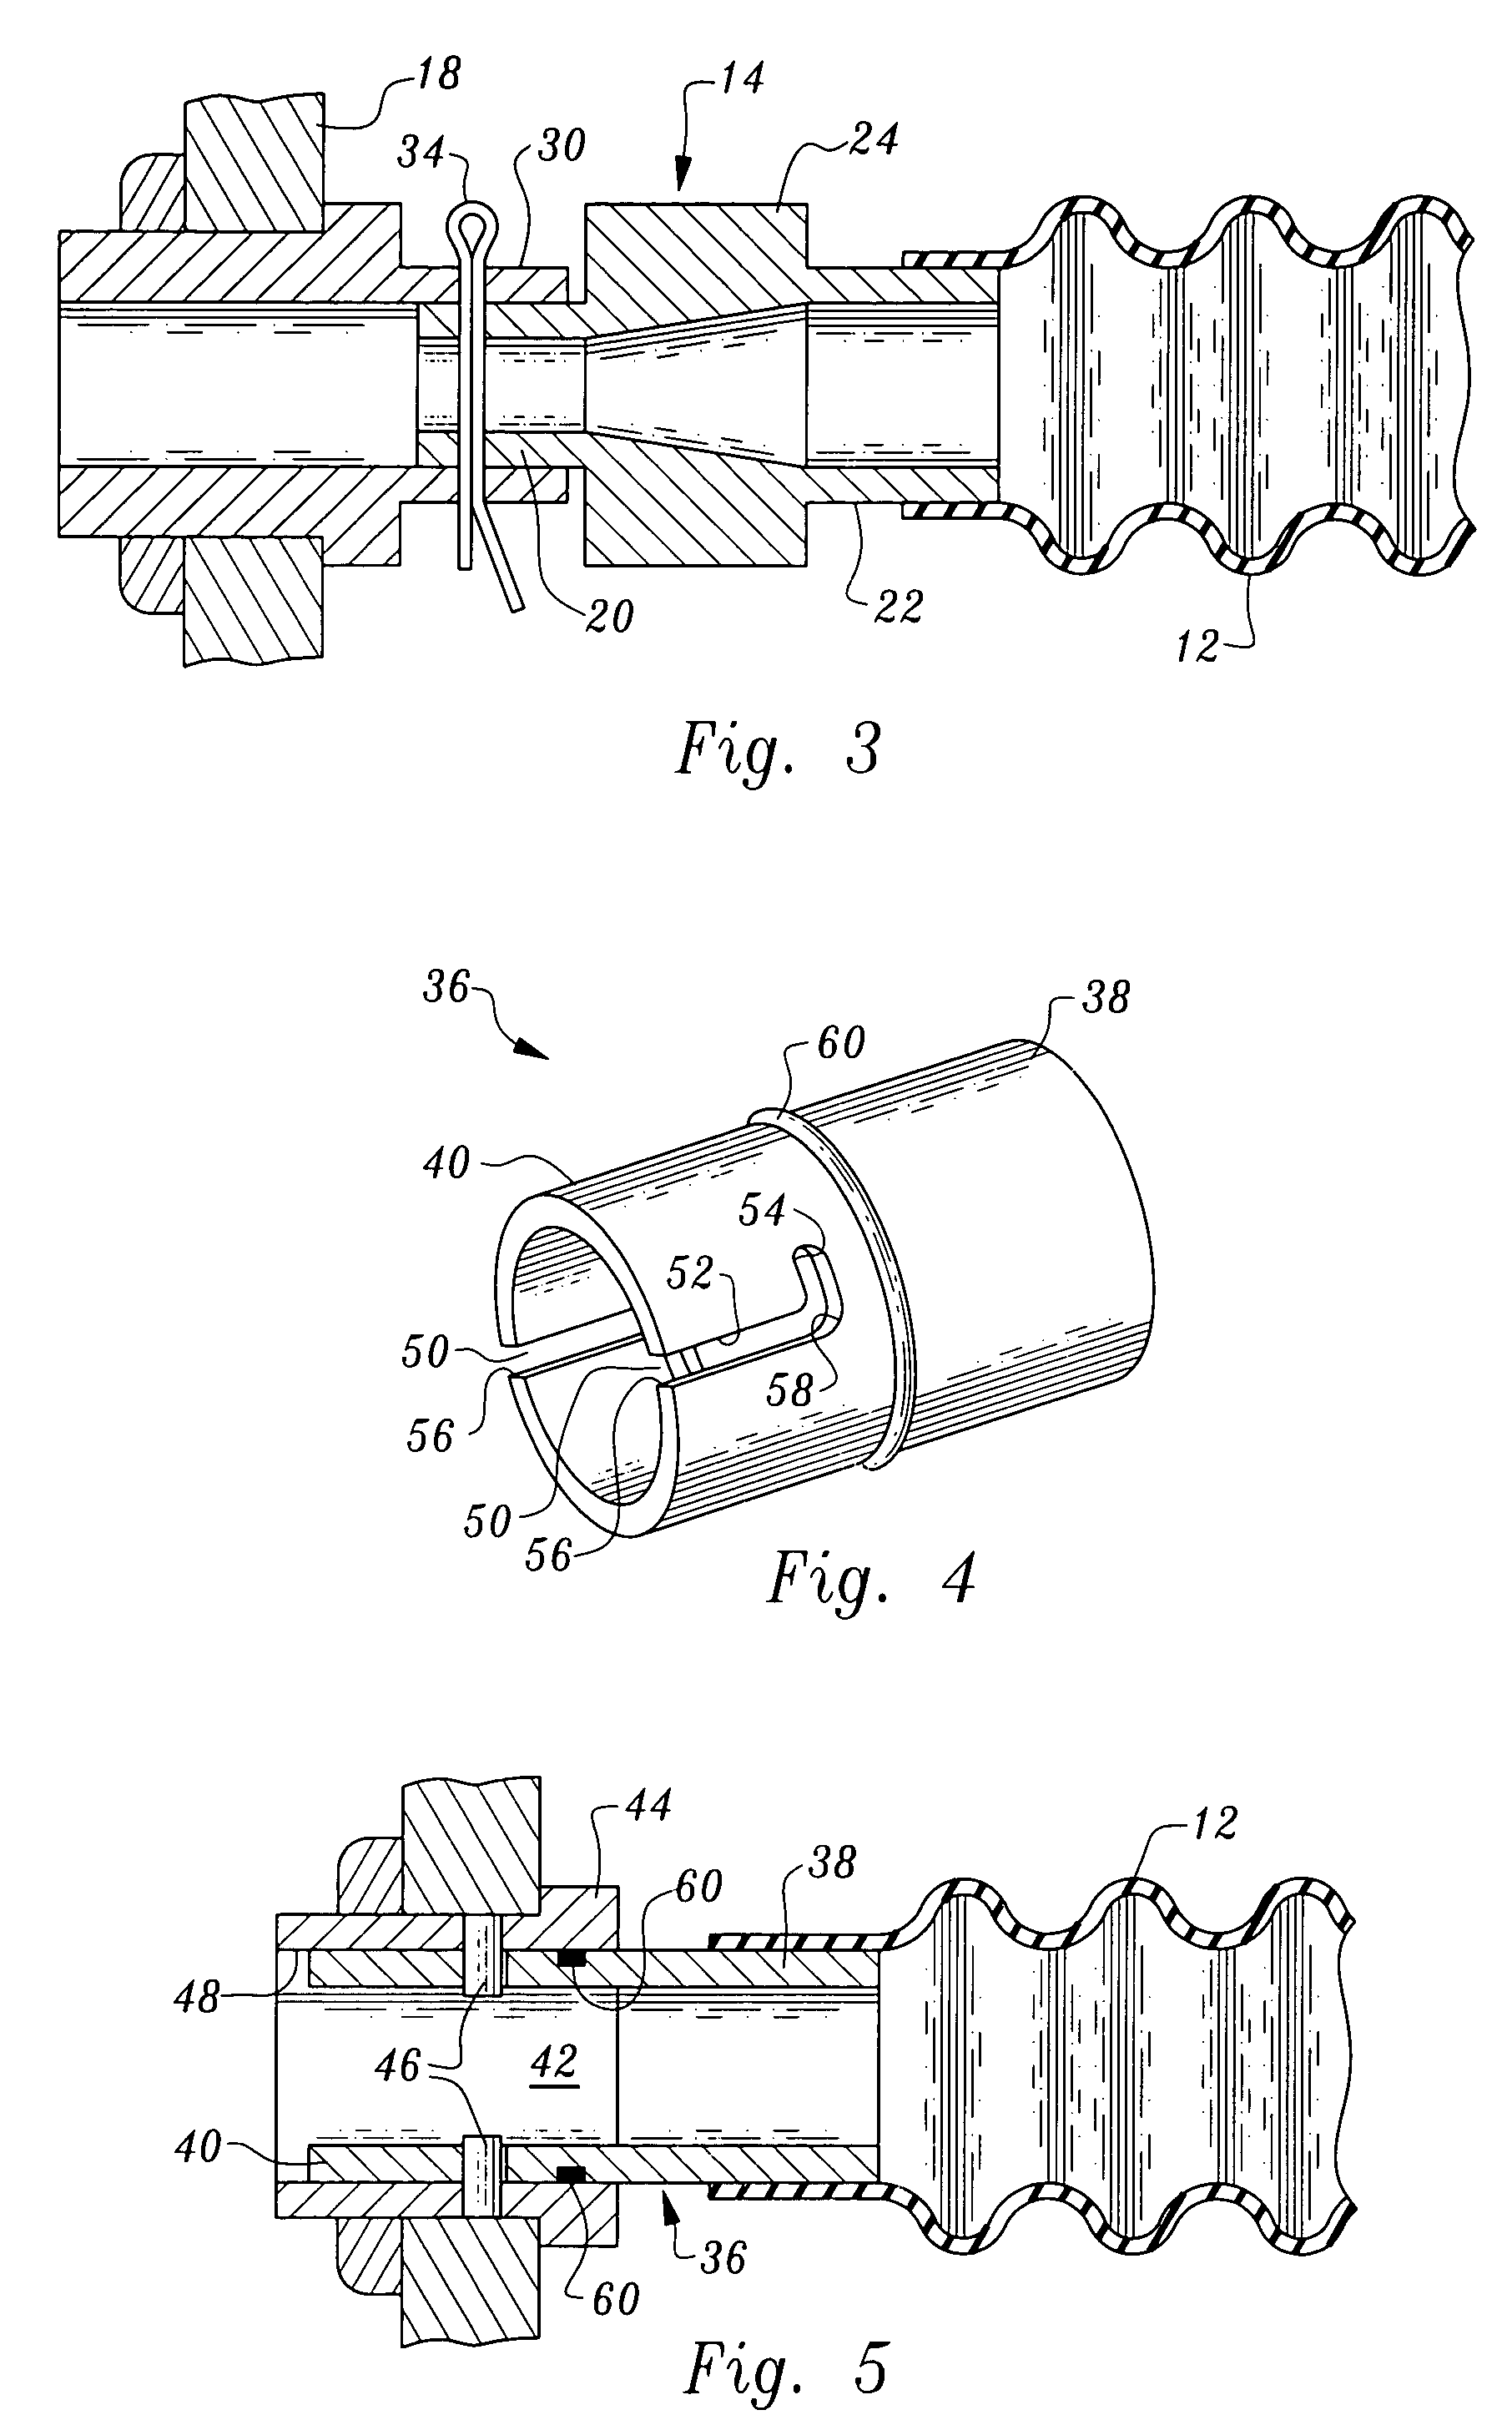 Device for redirecting boat motor exhaust